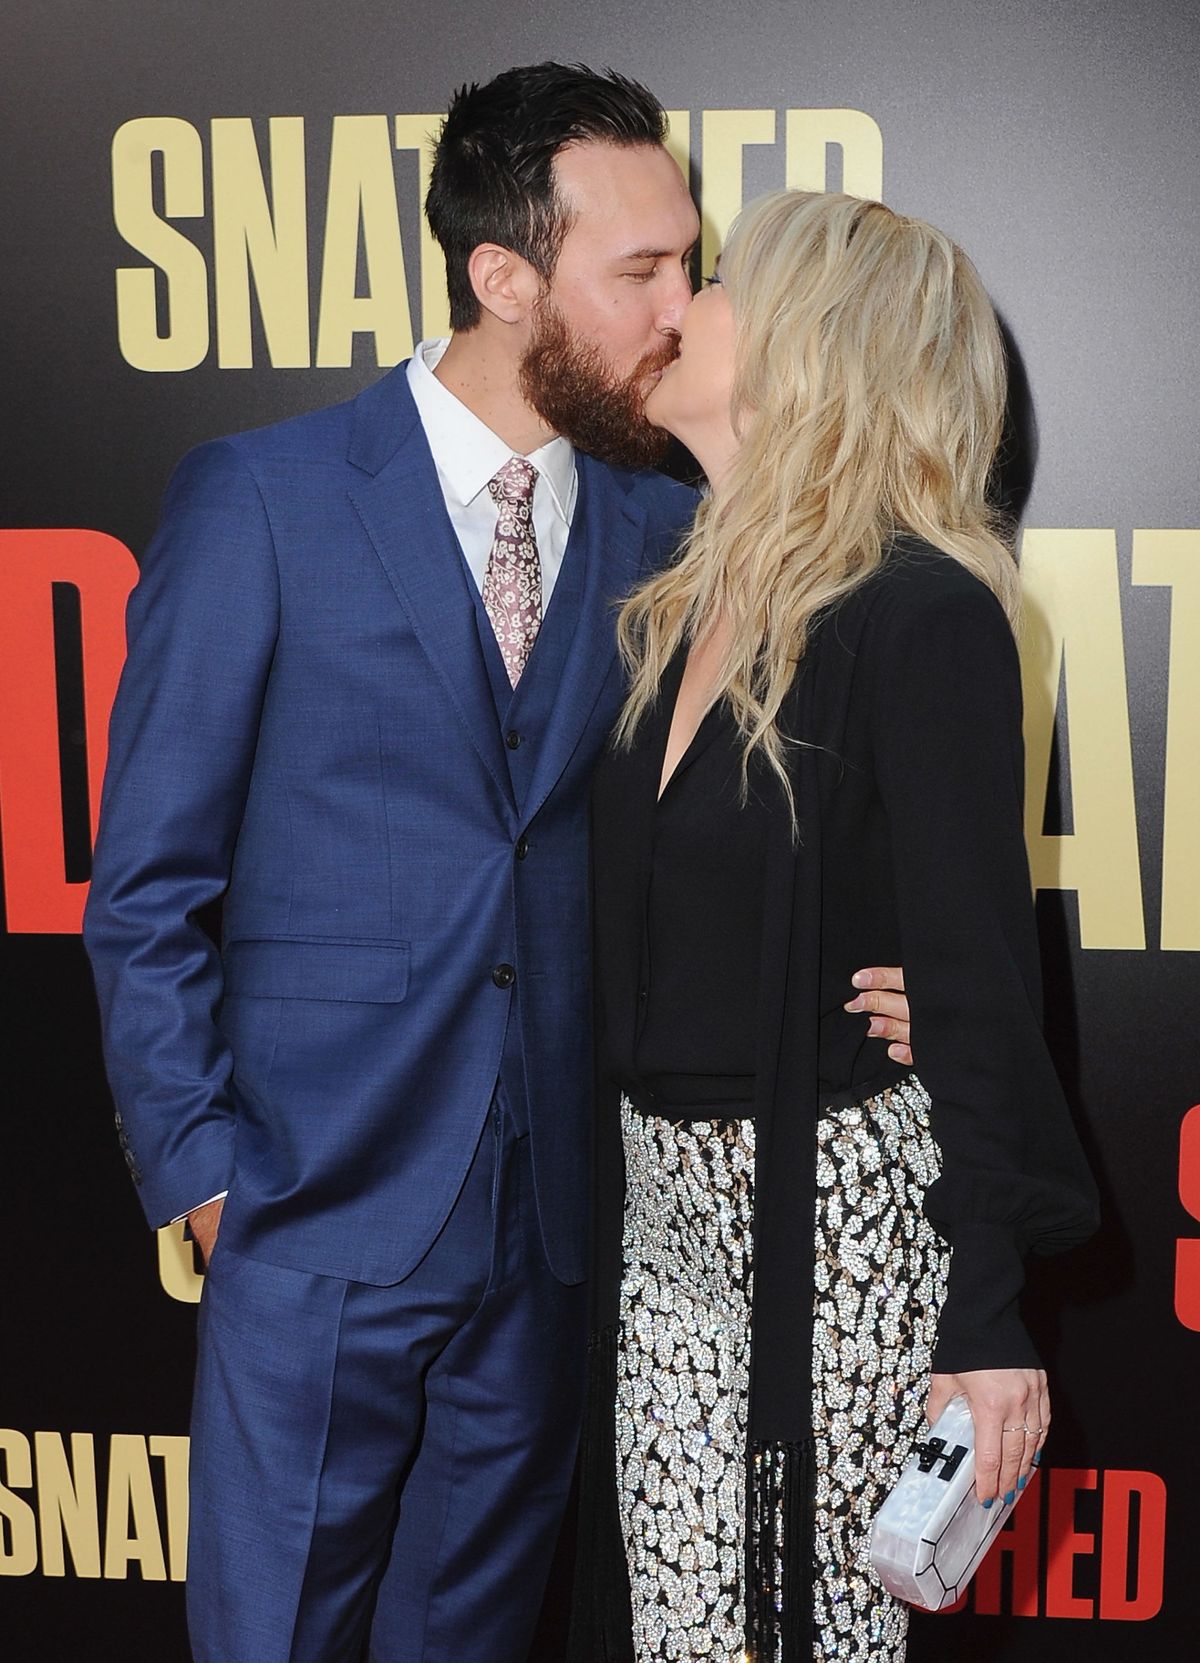 Kate Hudson and Danny Fujikawa make red carpet debut at Goldie Hawn's Snatched premiere in LA